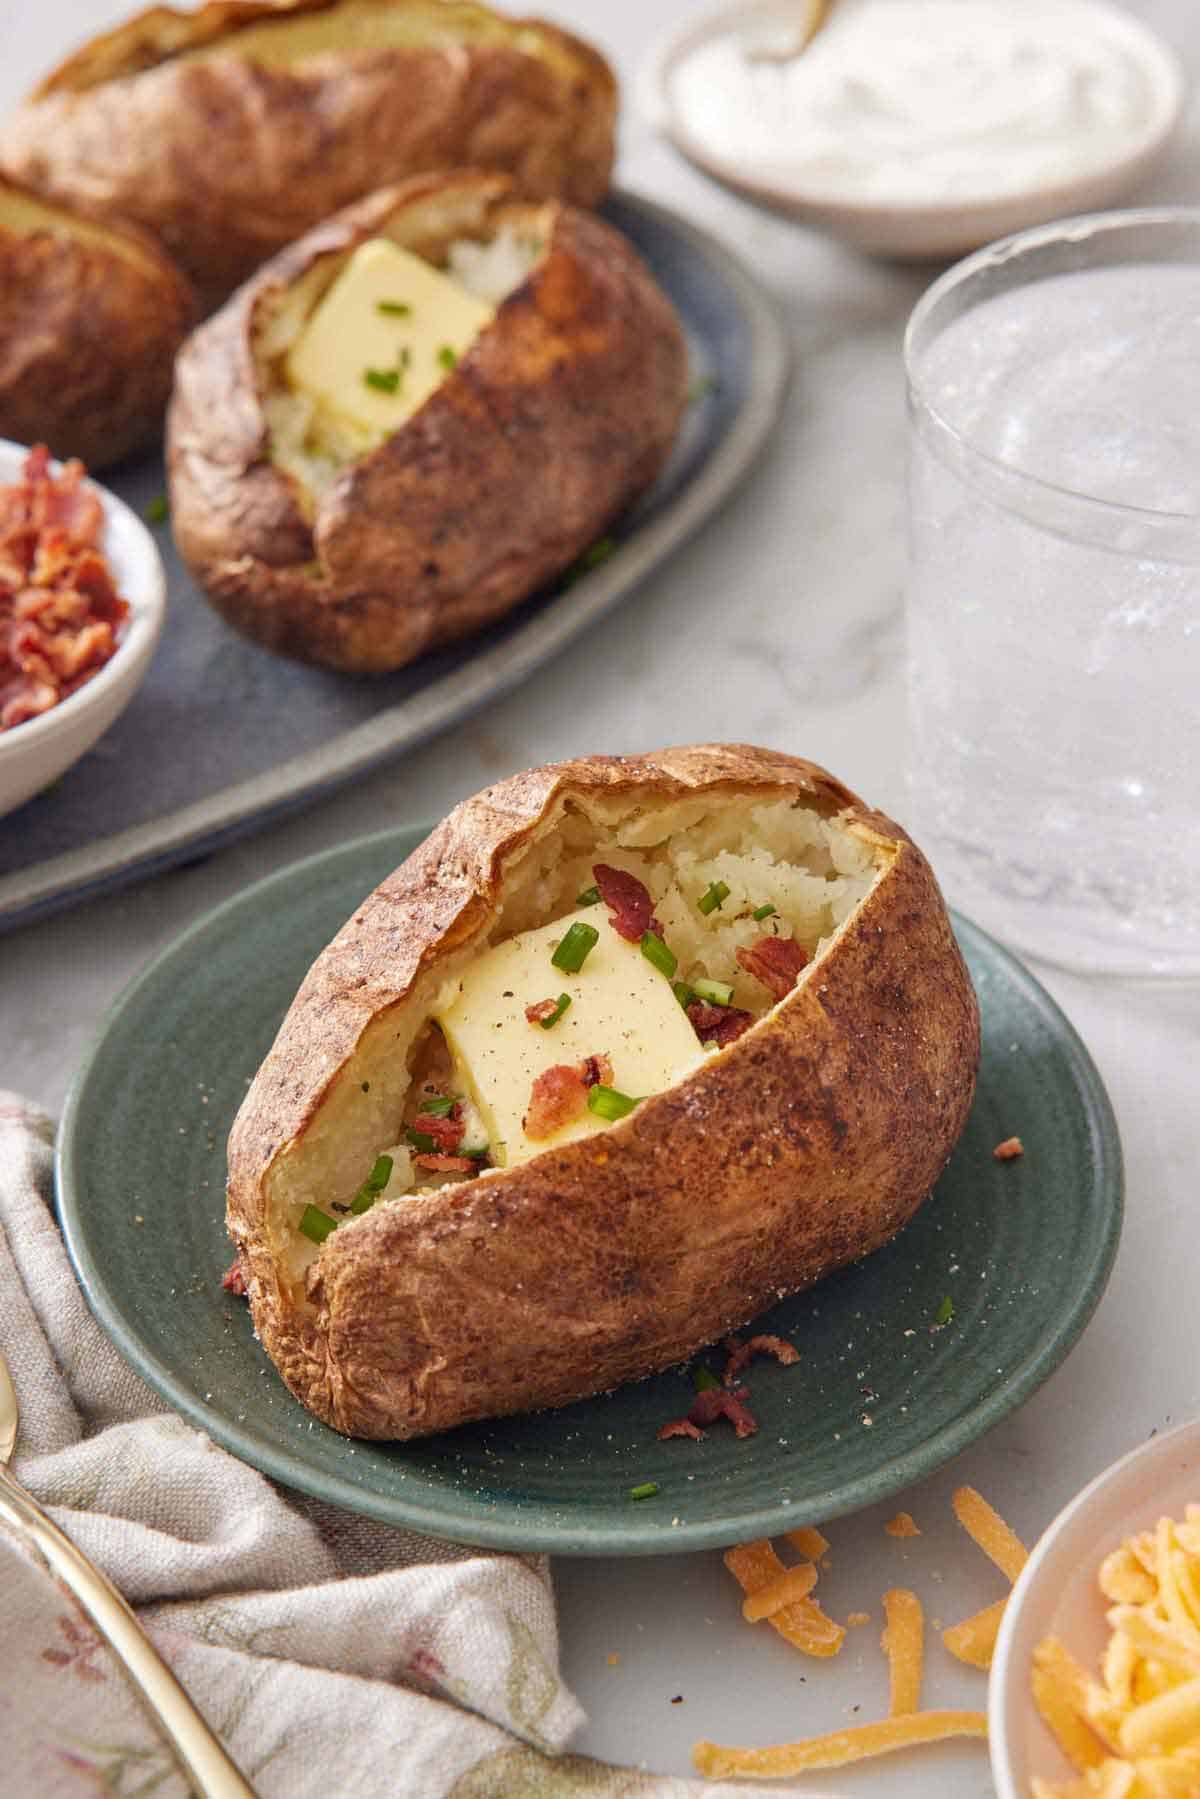 A plate with an air fryer baked potato topped with butter, chives, and crumbled bacon with more potatoes in the background.